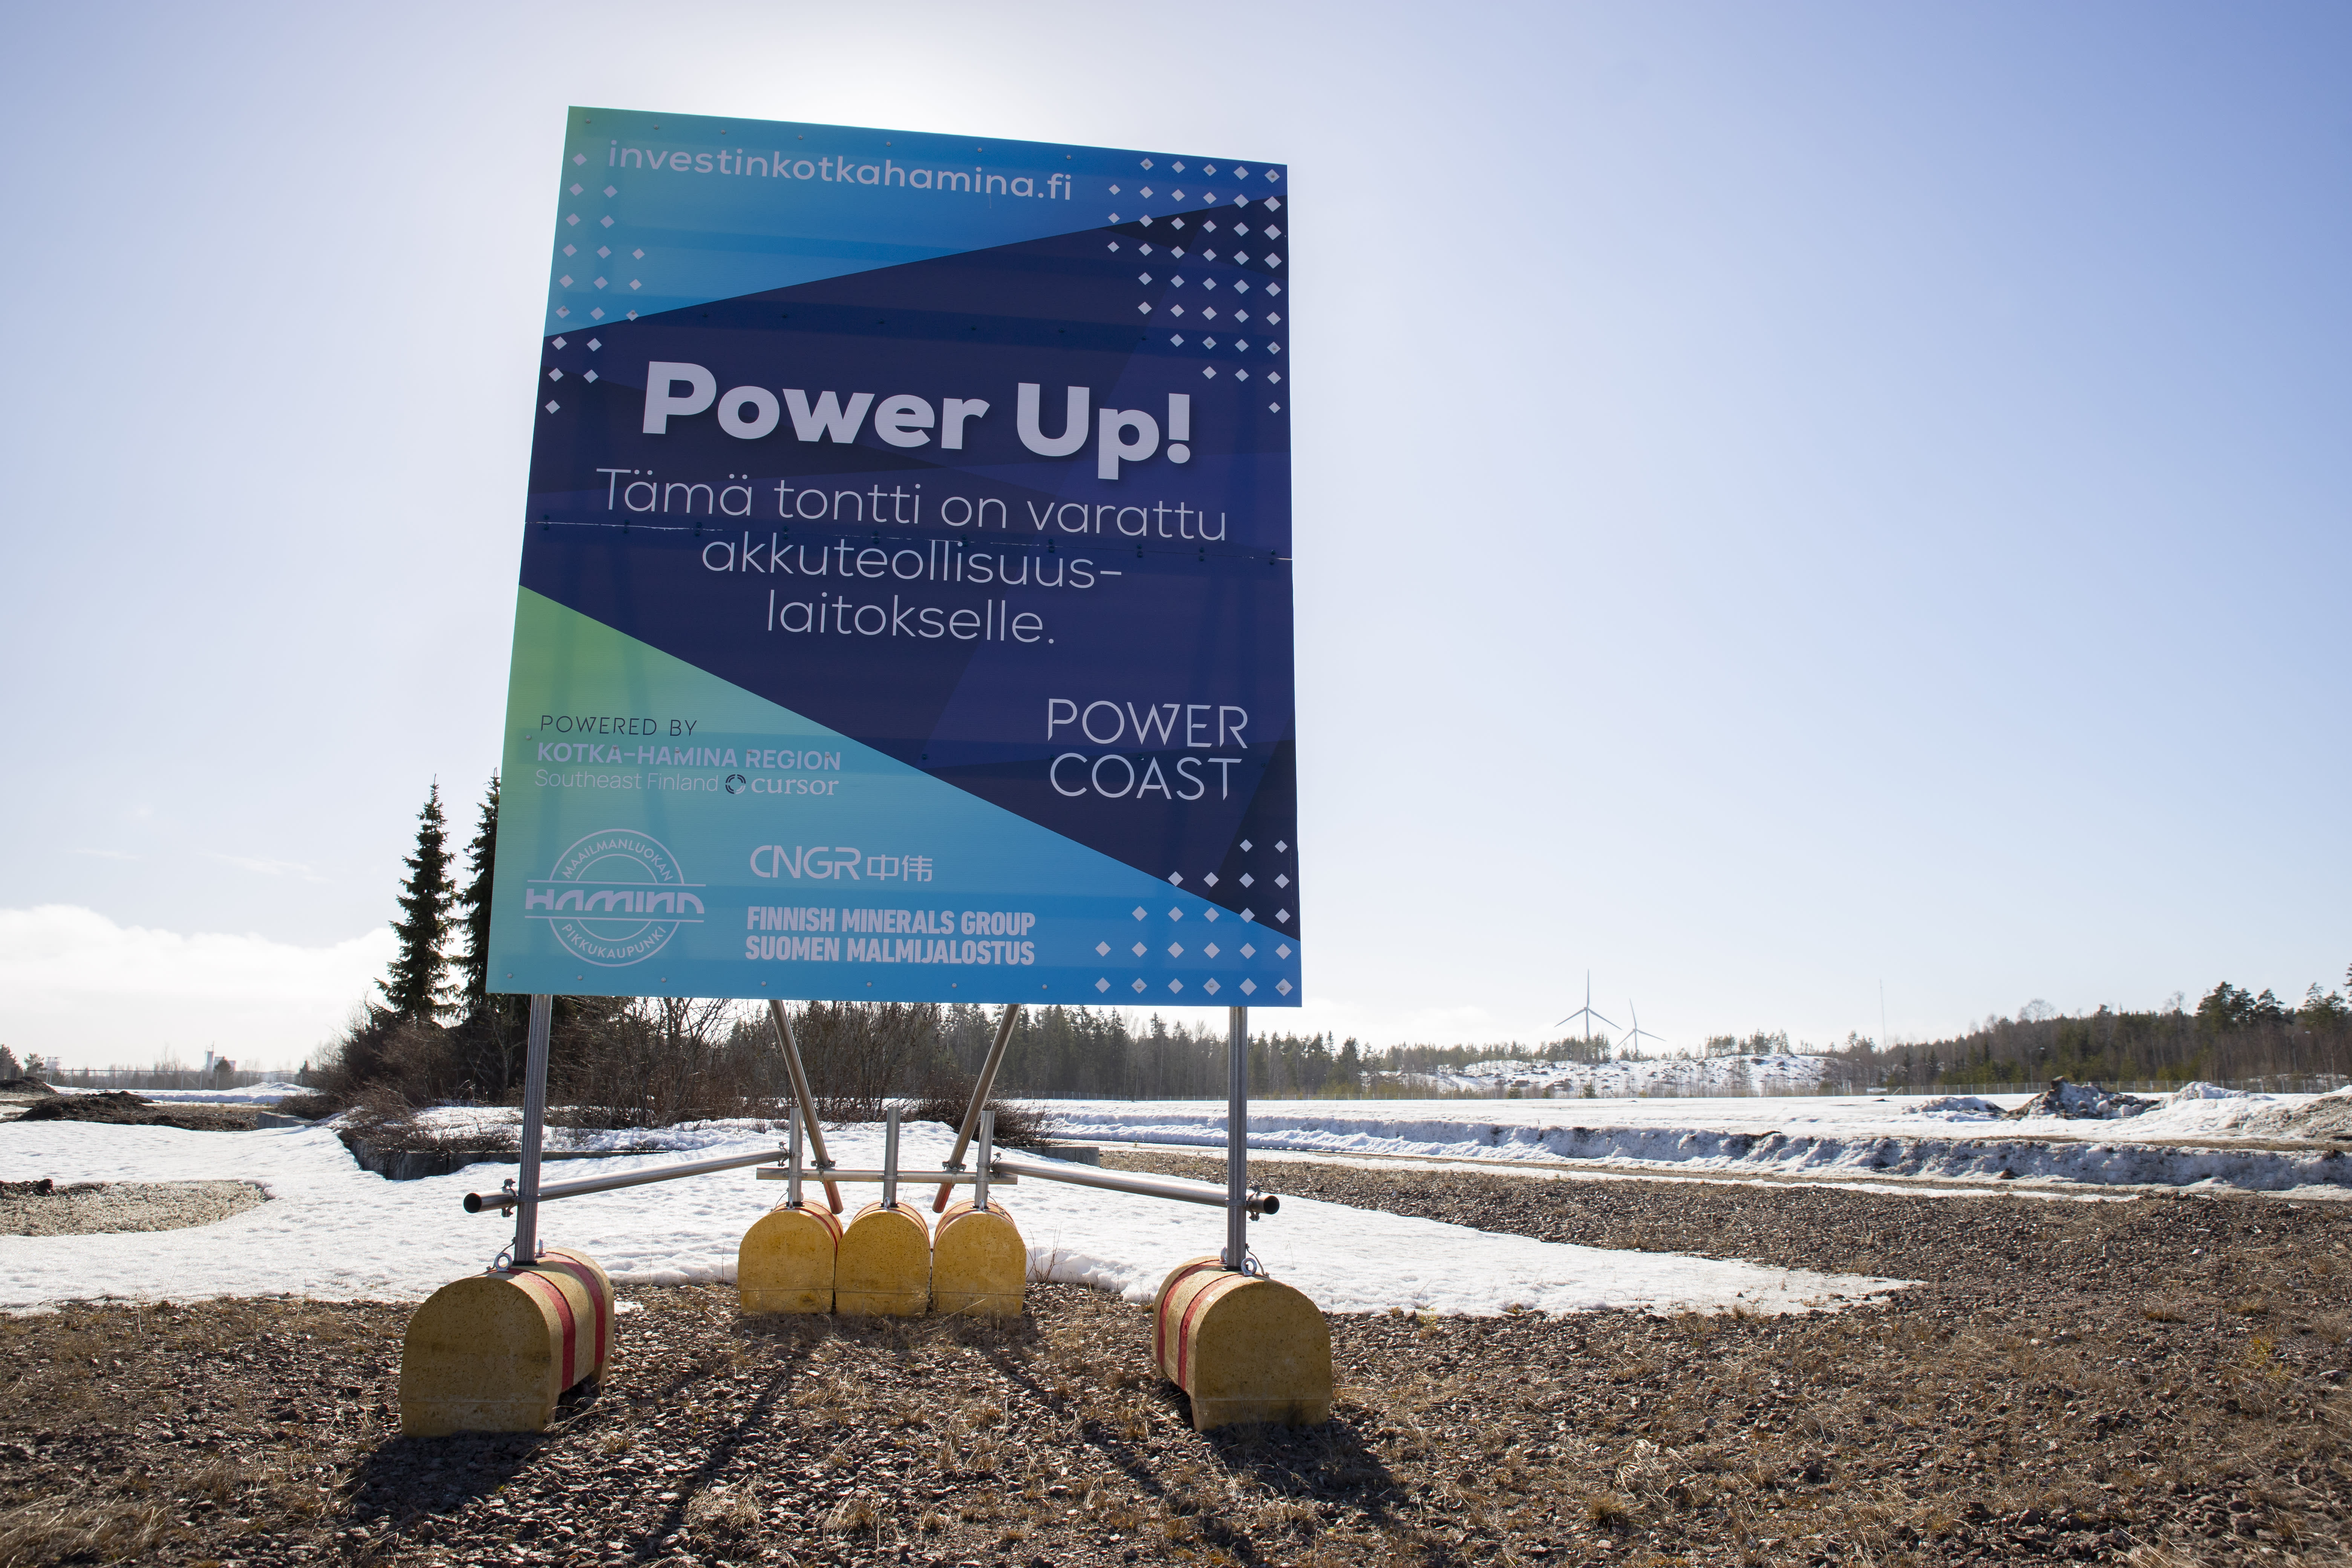 The controversial Sino-Finnish battery factory in Hamina receives an environmental permit